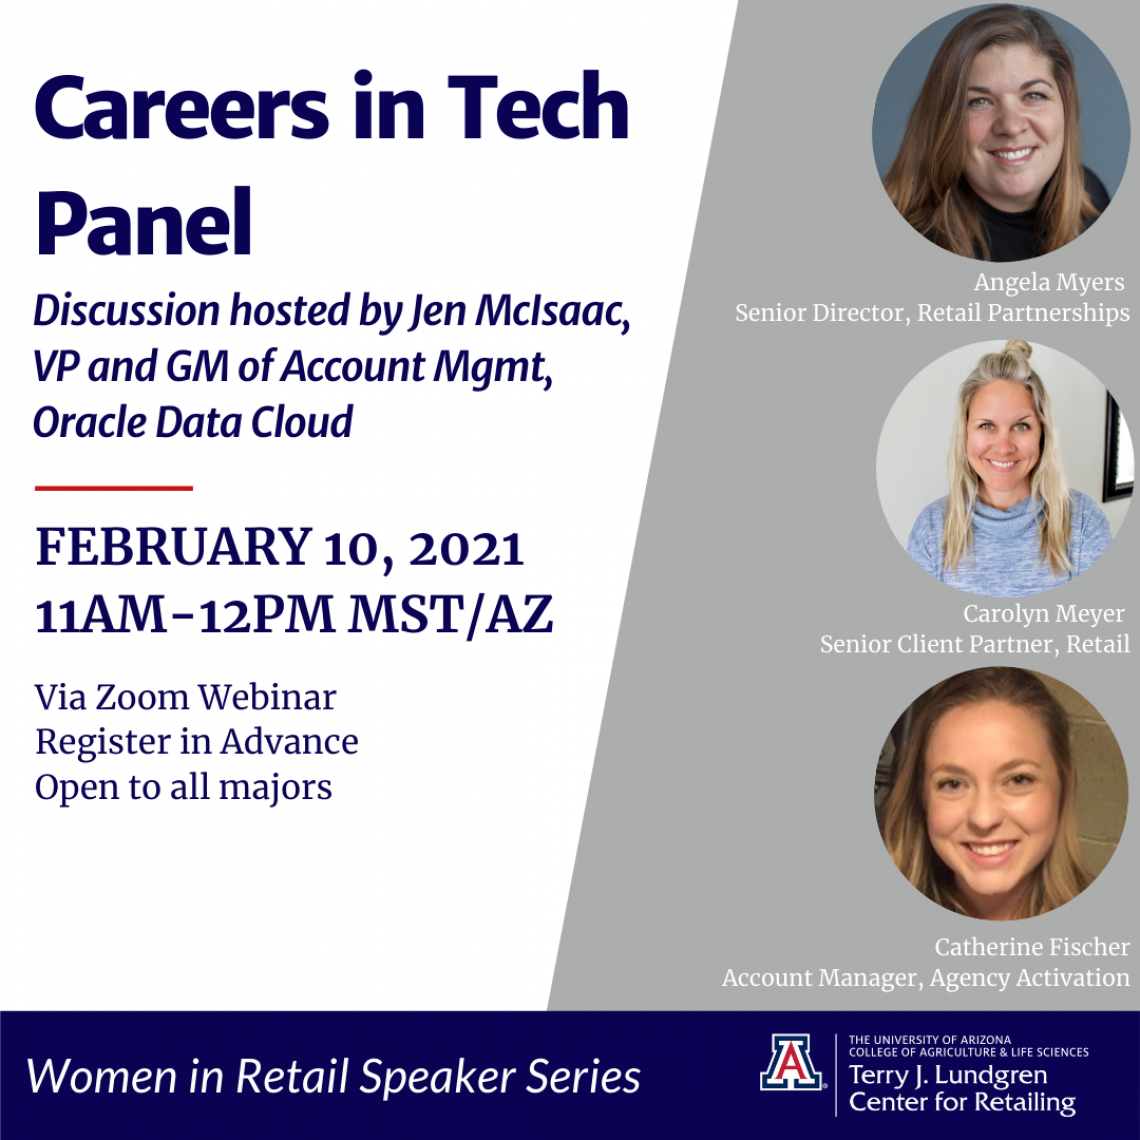 Careers in Retail Tech Panel